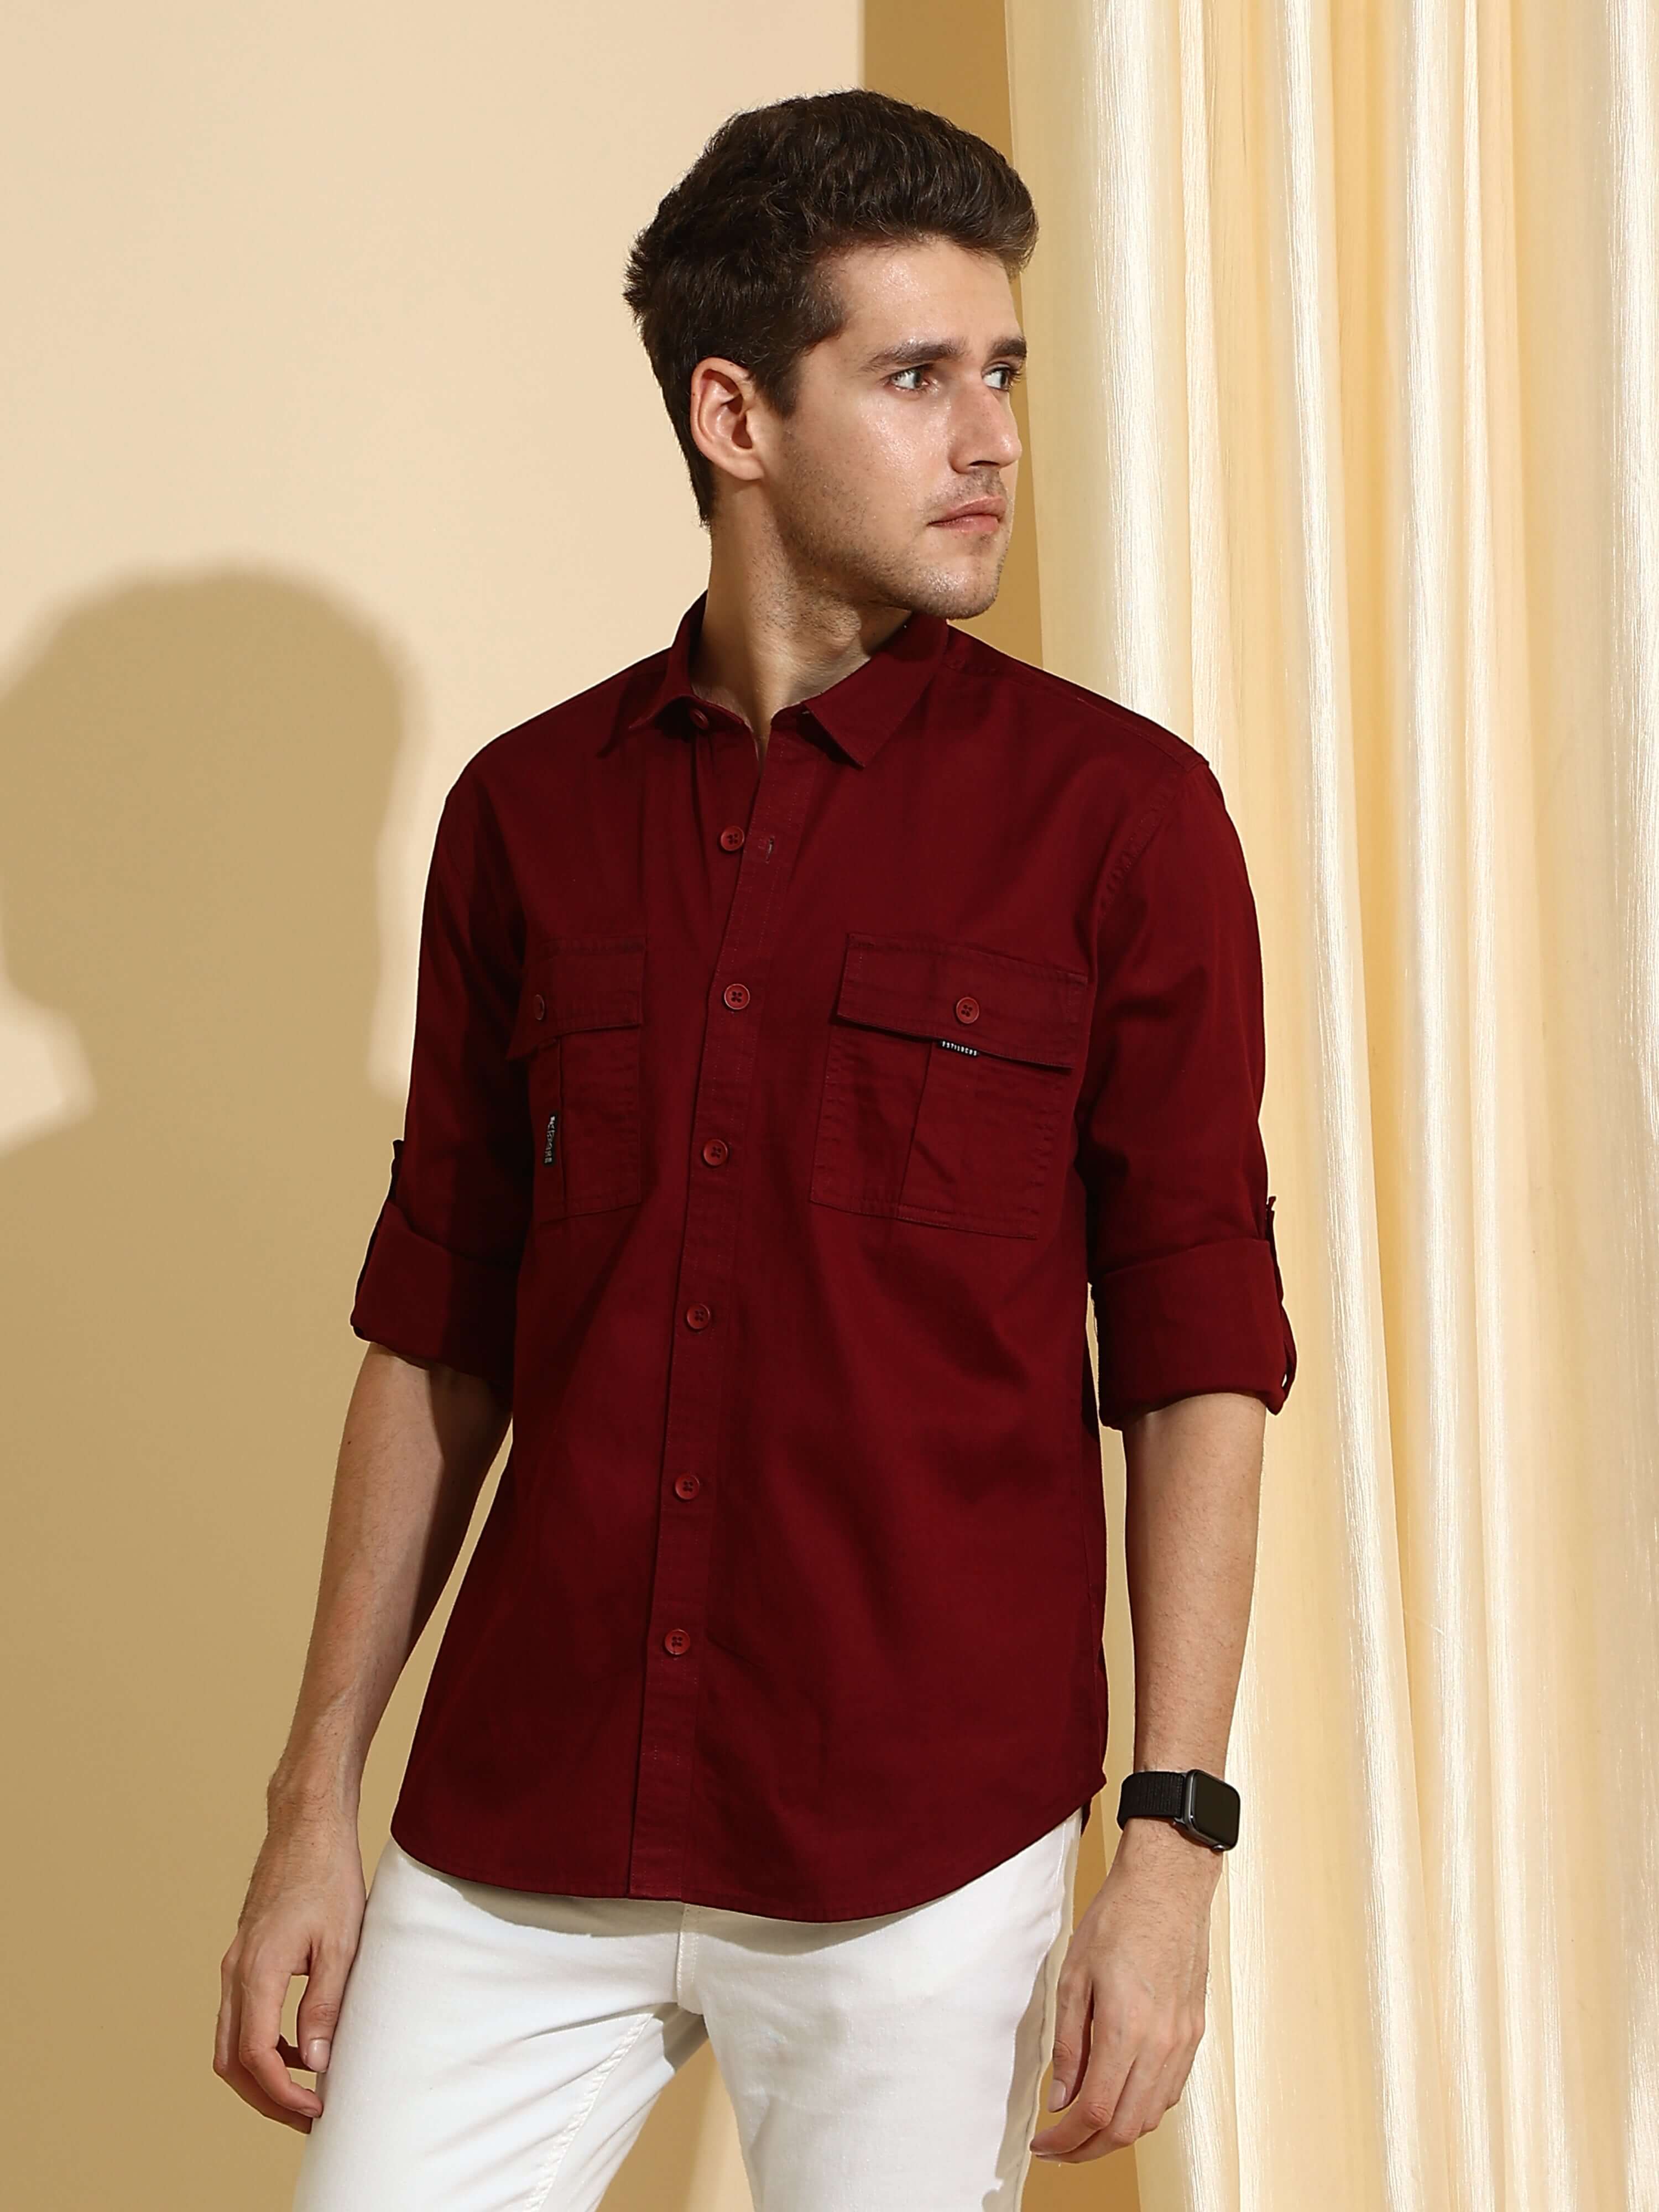 Burgundy maroon Cargo casual full sleeve shirt shop online at Estilocus. • 100% PREMIUM COTTON • Full-sleeve solid shirt• Cut and sew placket• Regular collar• Double button round cuffs.• Double pocket with flap• Curved hemline• Finest quality sewing with